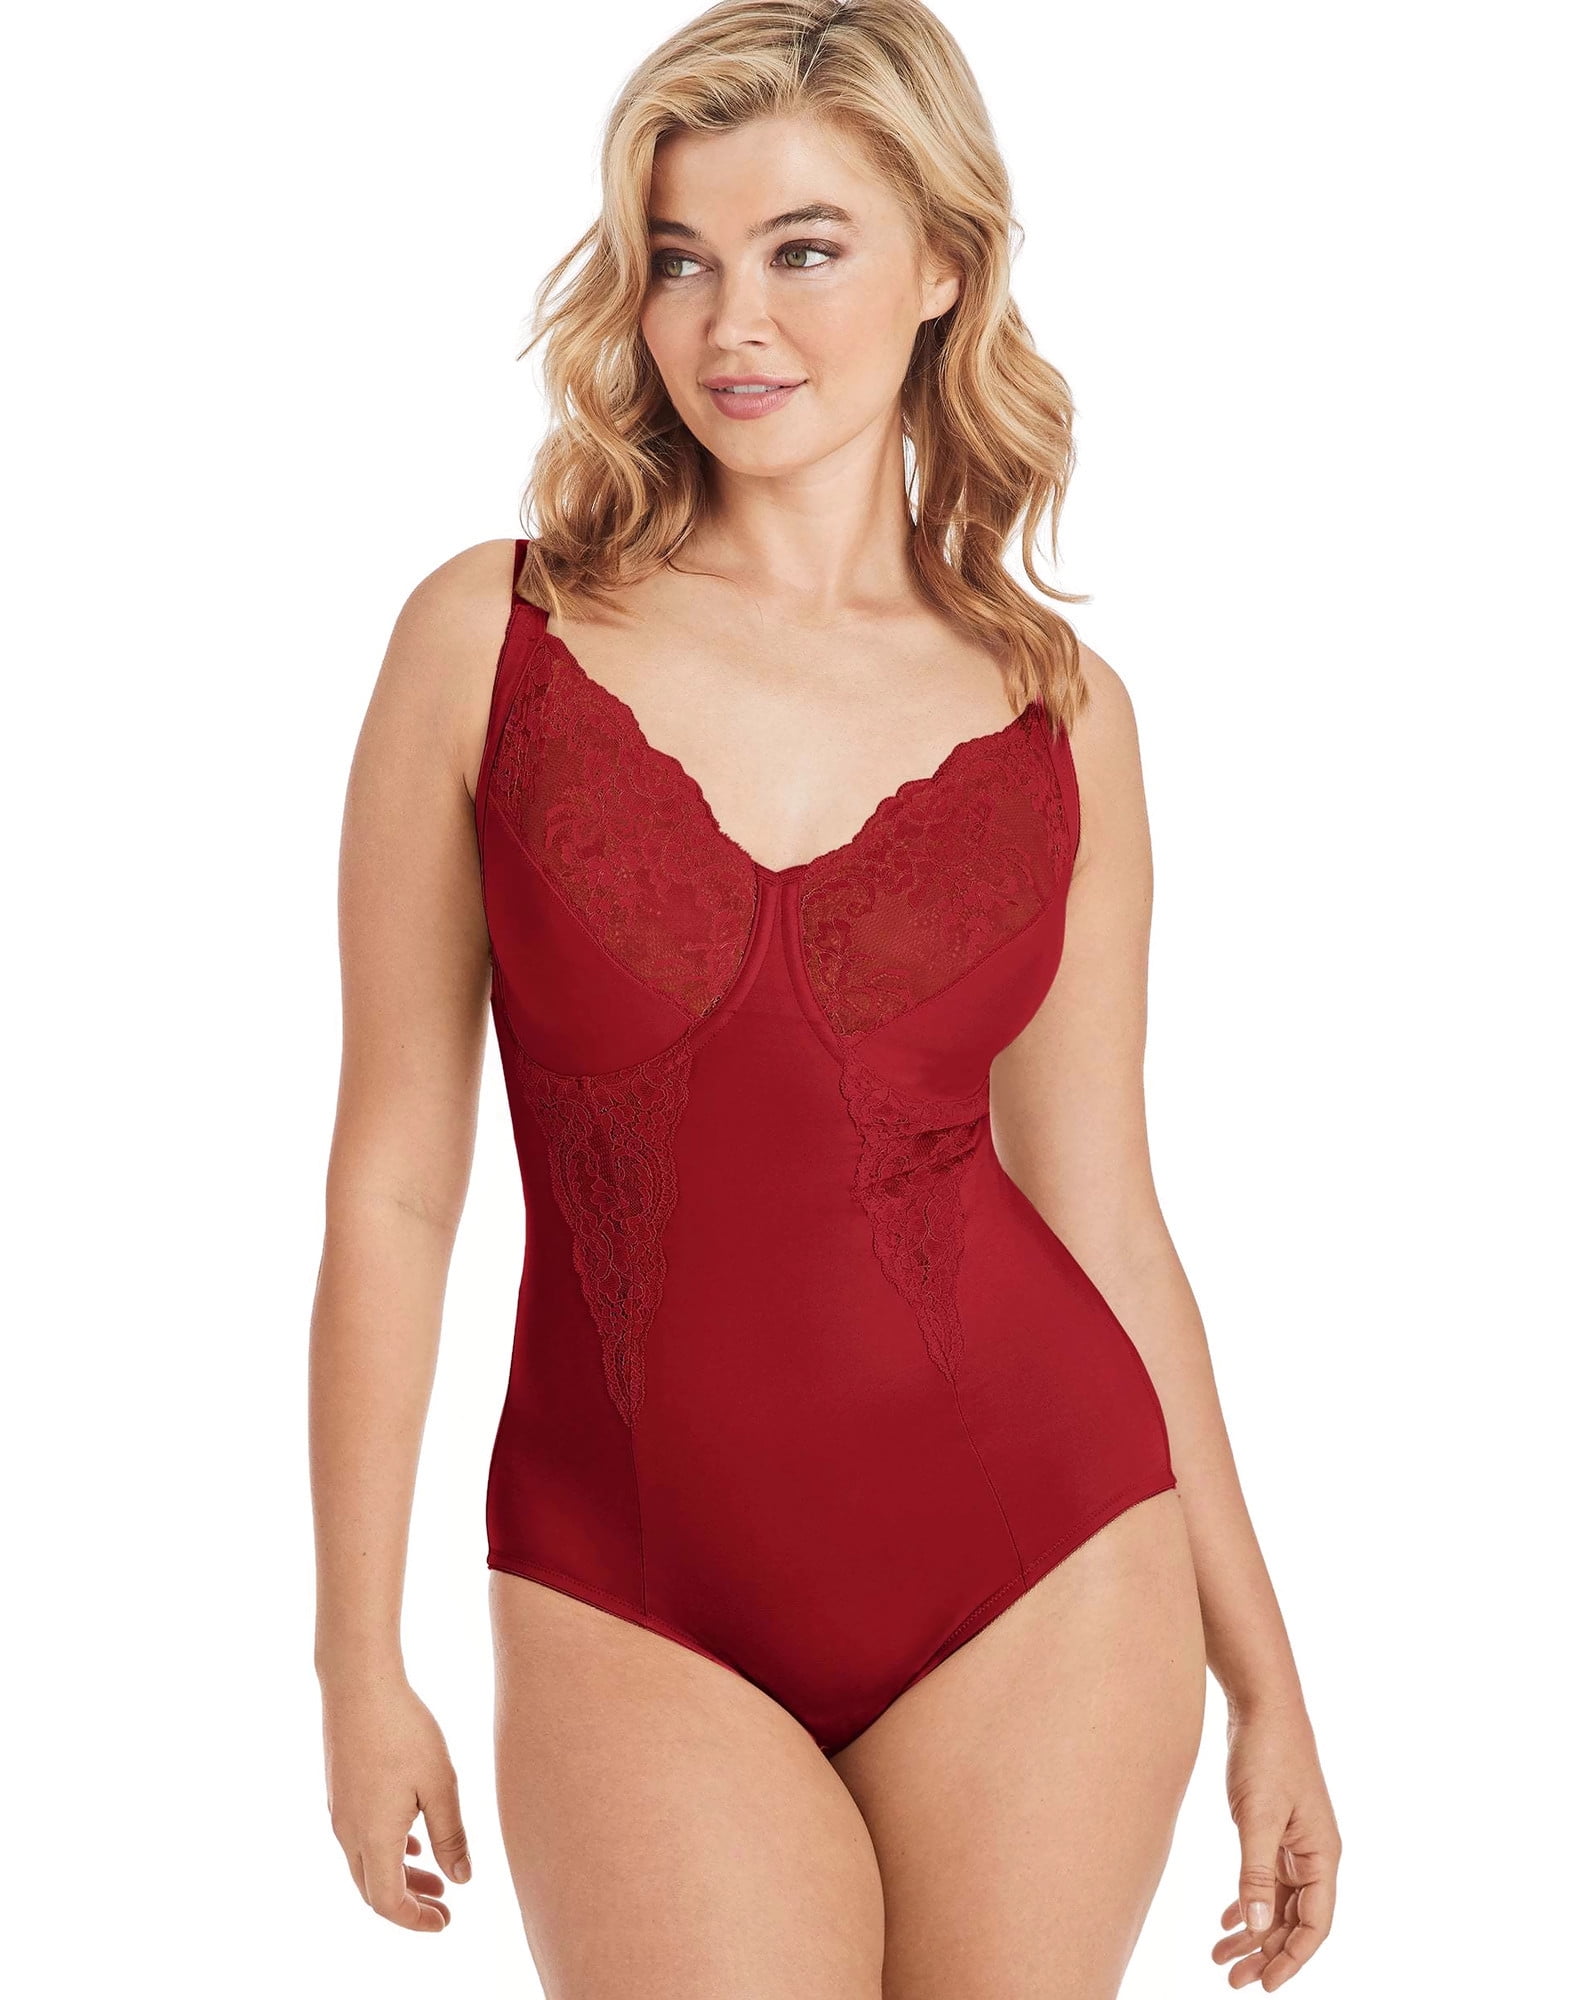 Buy Flexees Maidenform Women's Shapewear Body Briefer with Lace